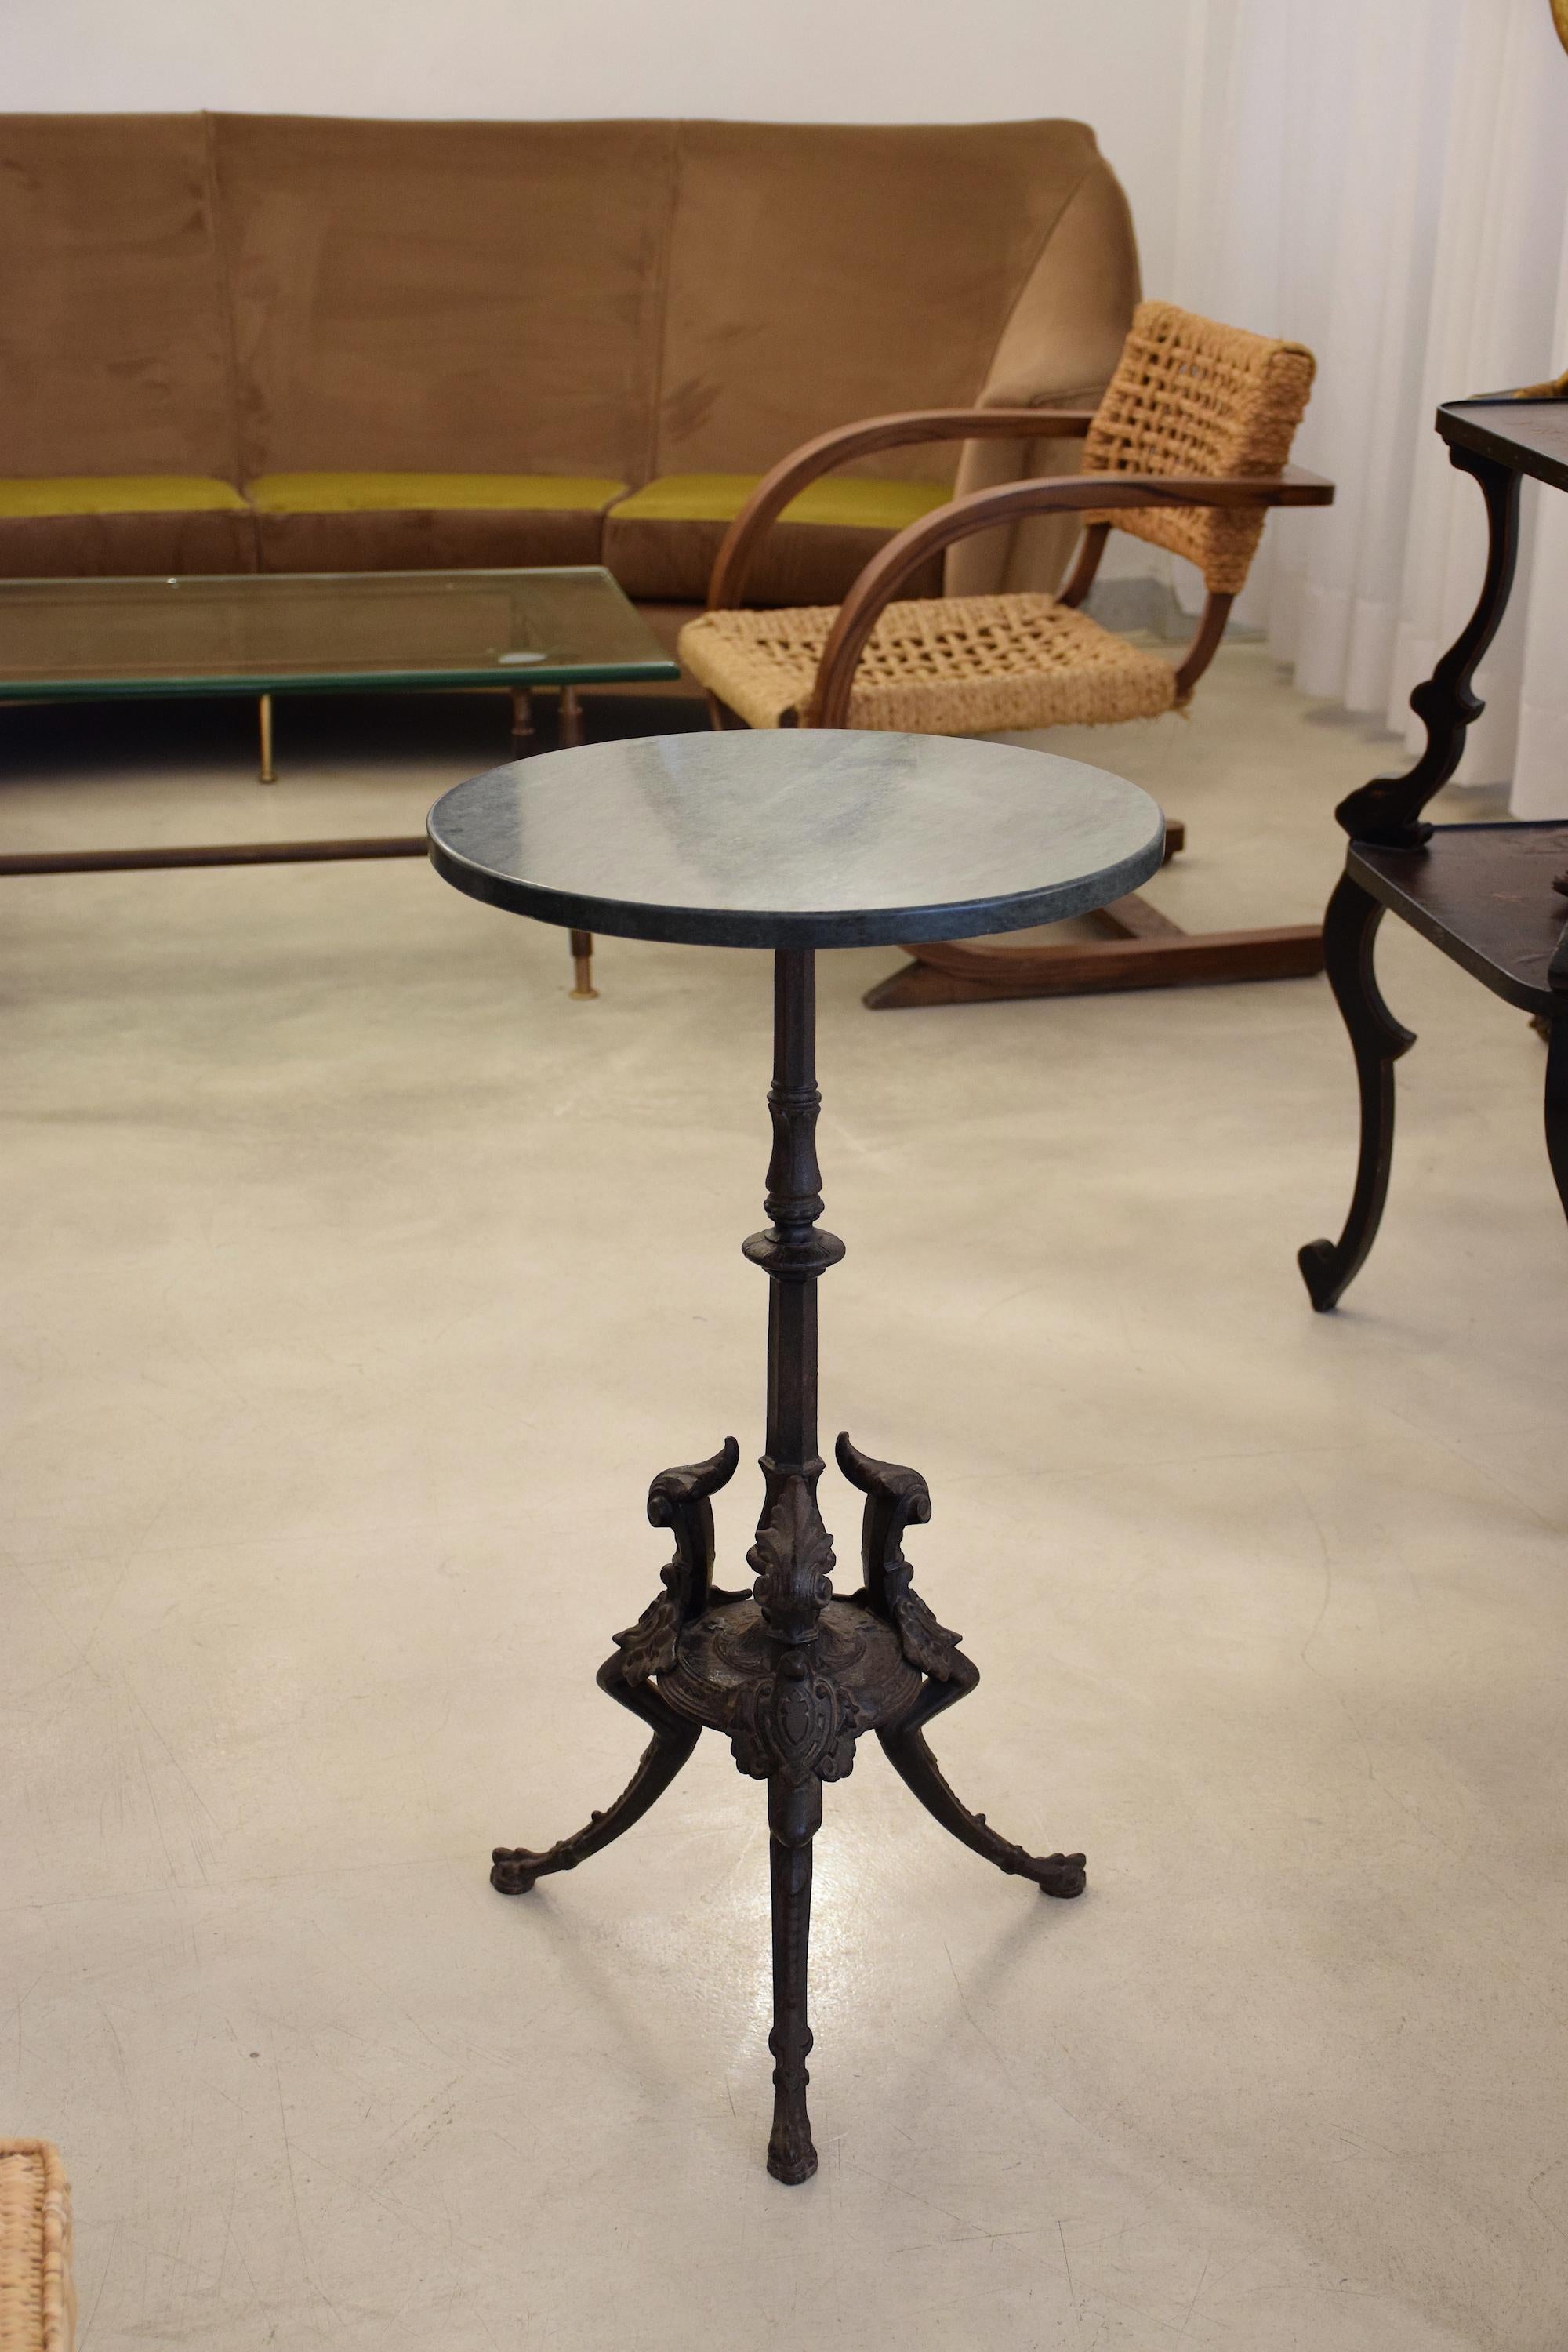 A french antique gueridon, pedestal or side table dating back to the 19th century from the Napoleon III period crafted with a black wrought iron tripod structure and intricately sculpted details with beautiful patina. Restored with a circular green